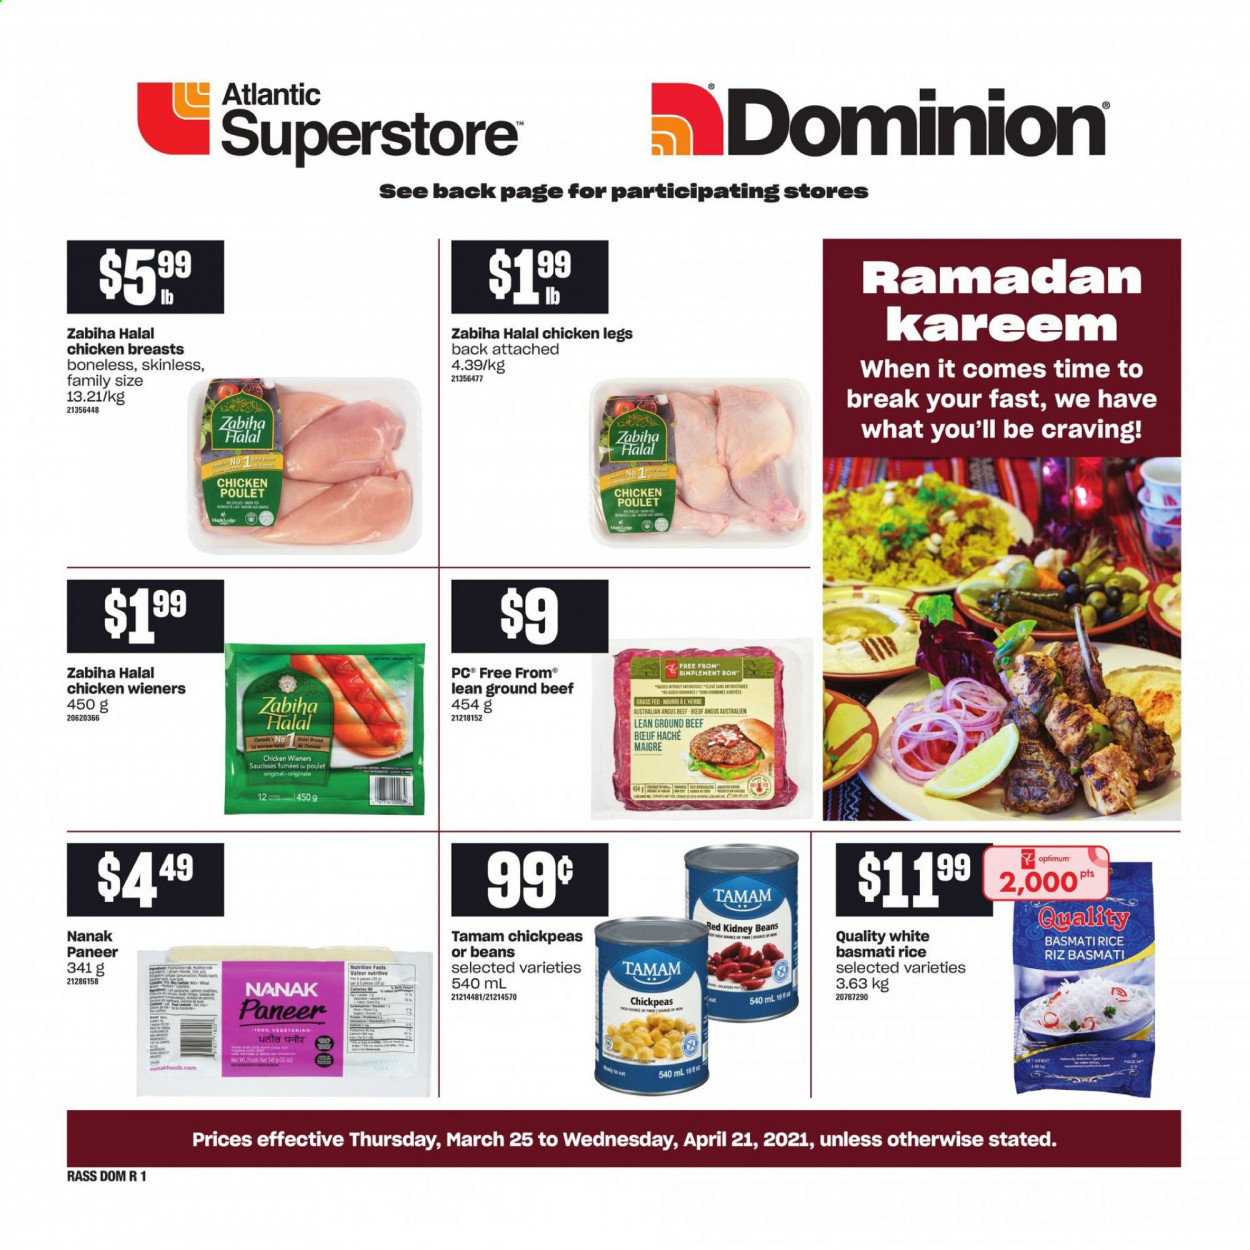 thumbnail - Atlantic Superstore Flyer - March 25, 2021 - April 21, 2021 - Sales products - beans, paneer, kidney beans, basmati rice, rice, chickpeas, chicken breasts, chicken legs, chicken, beef meat, ground beef, Optimum. Page 1.